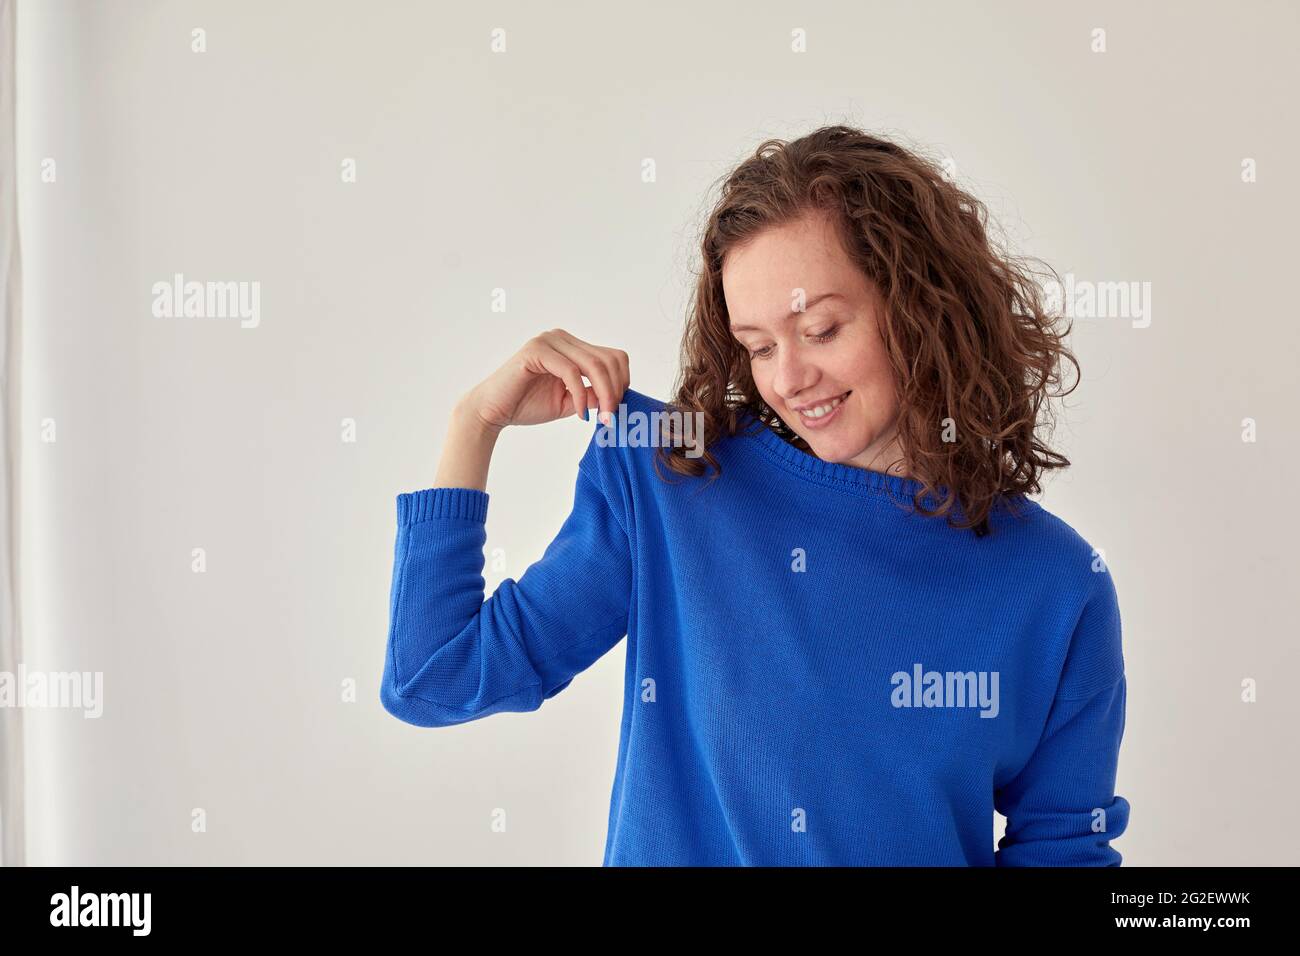 Young female model in trendy oversize blue woolen sweatshirt looking at camera against white background Stock Photo